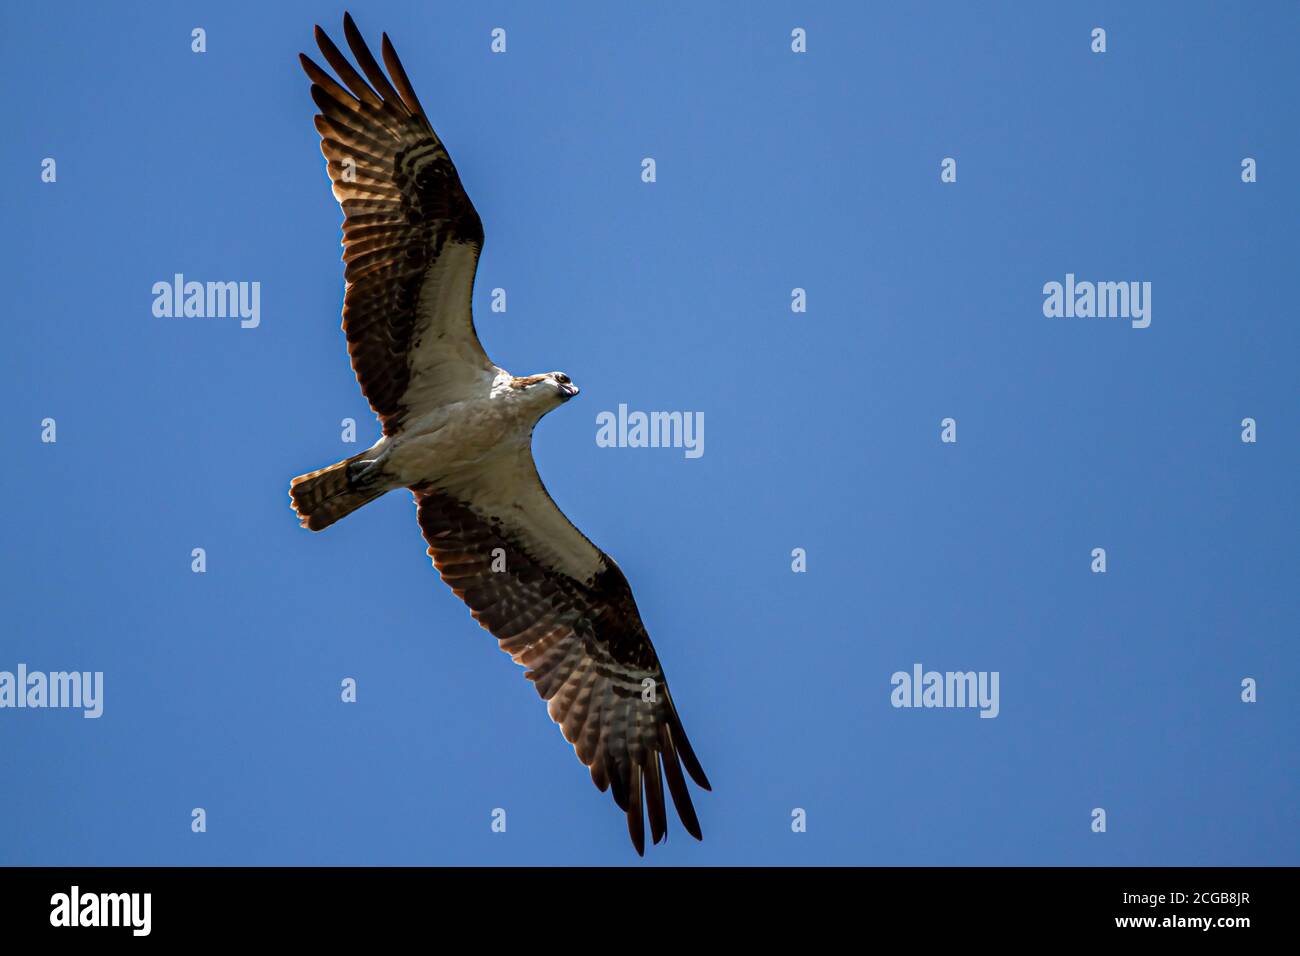 isolated overhead shot of an osprey  (sea hawk) (Pandion haliaetus) in flight against clear blue sky. Sunlight causes rim lighting on its feathers. Stock Photo